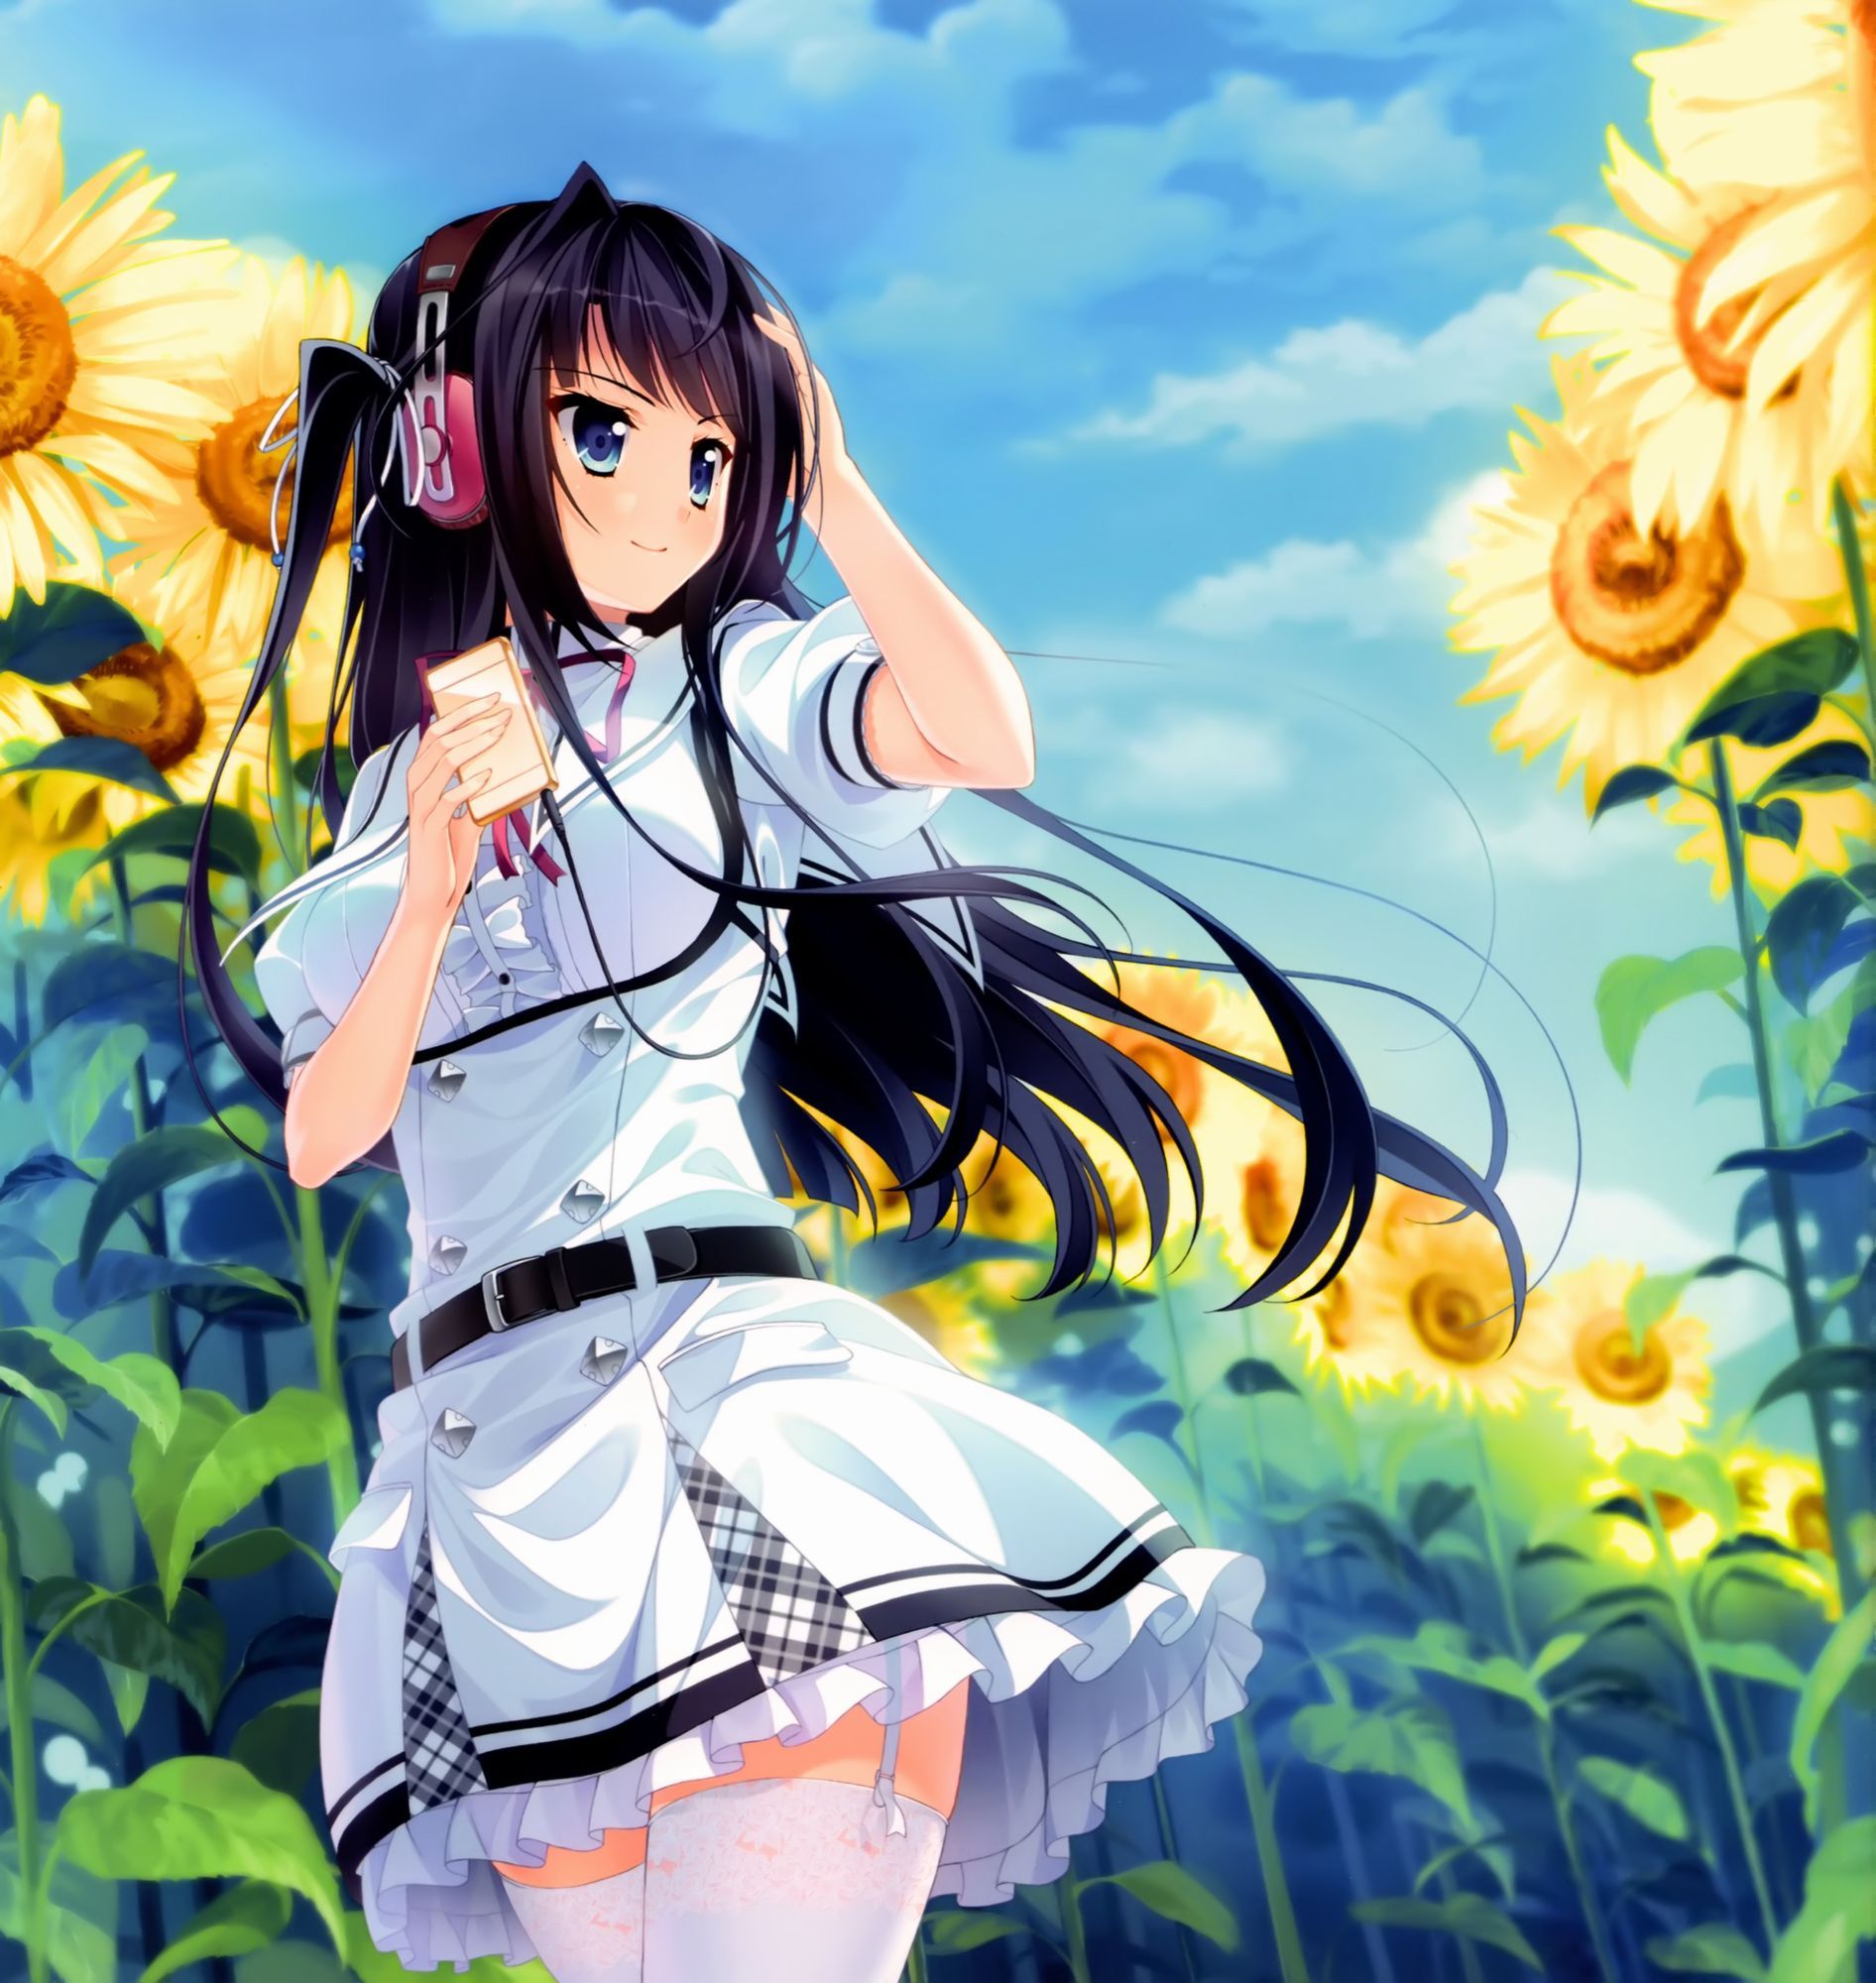 [Secondary, ZIP] summer 2: girl with a sunflower or image summary 48